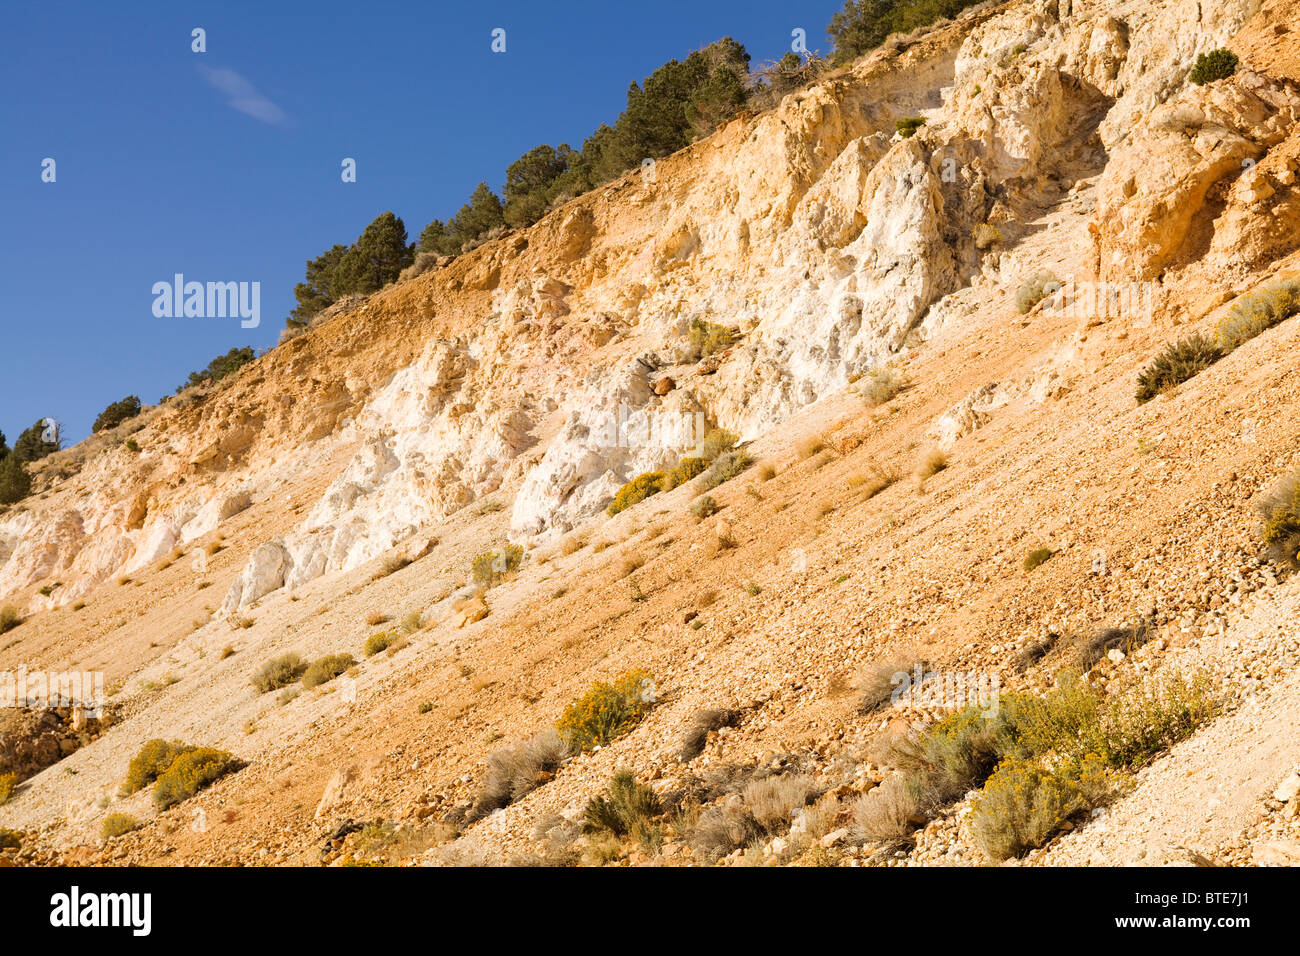 A cut away view of mineral rich landscape due to erosion - California USA Stock Photo